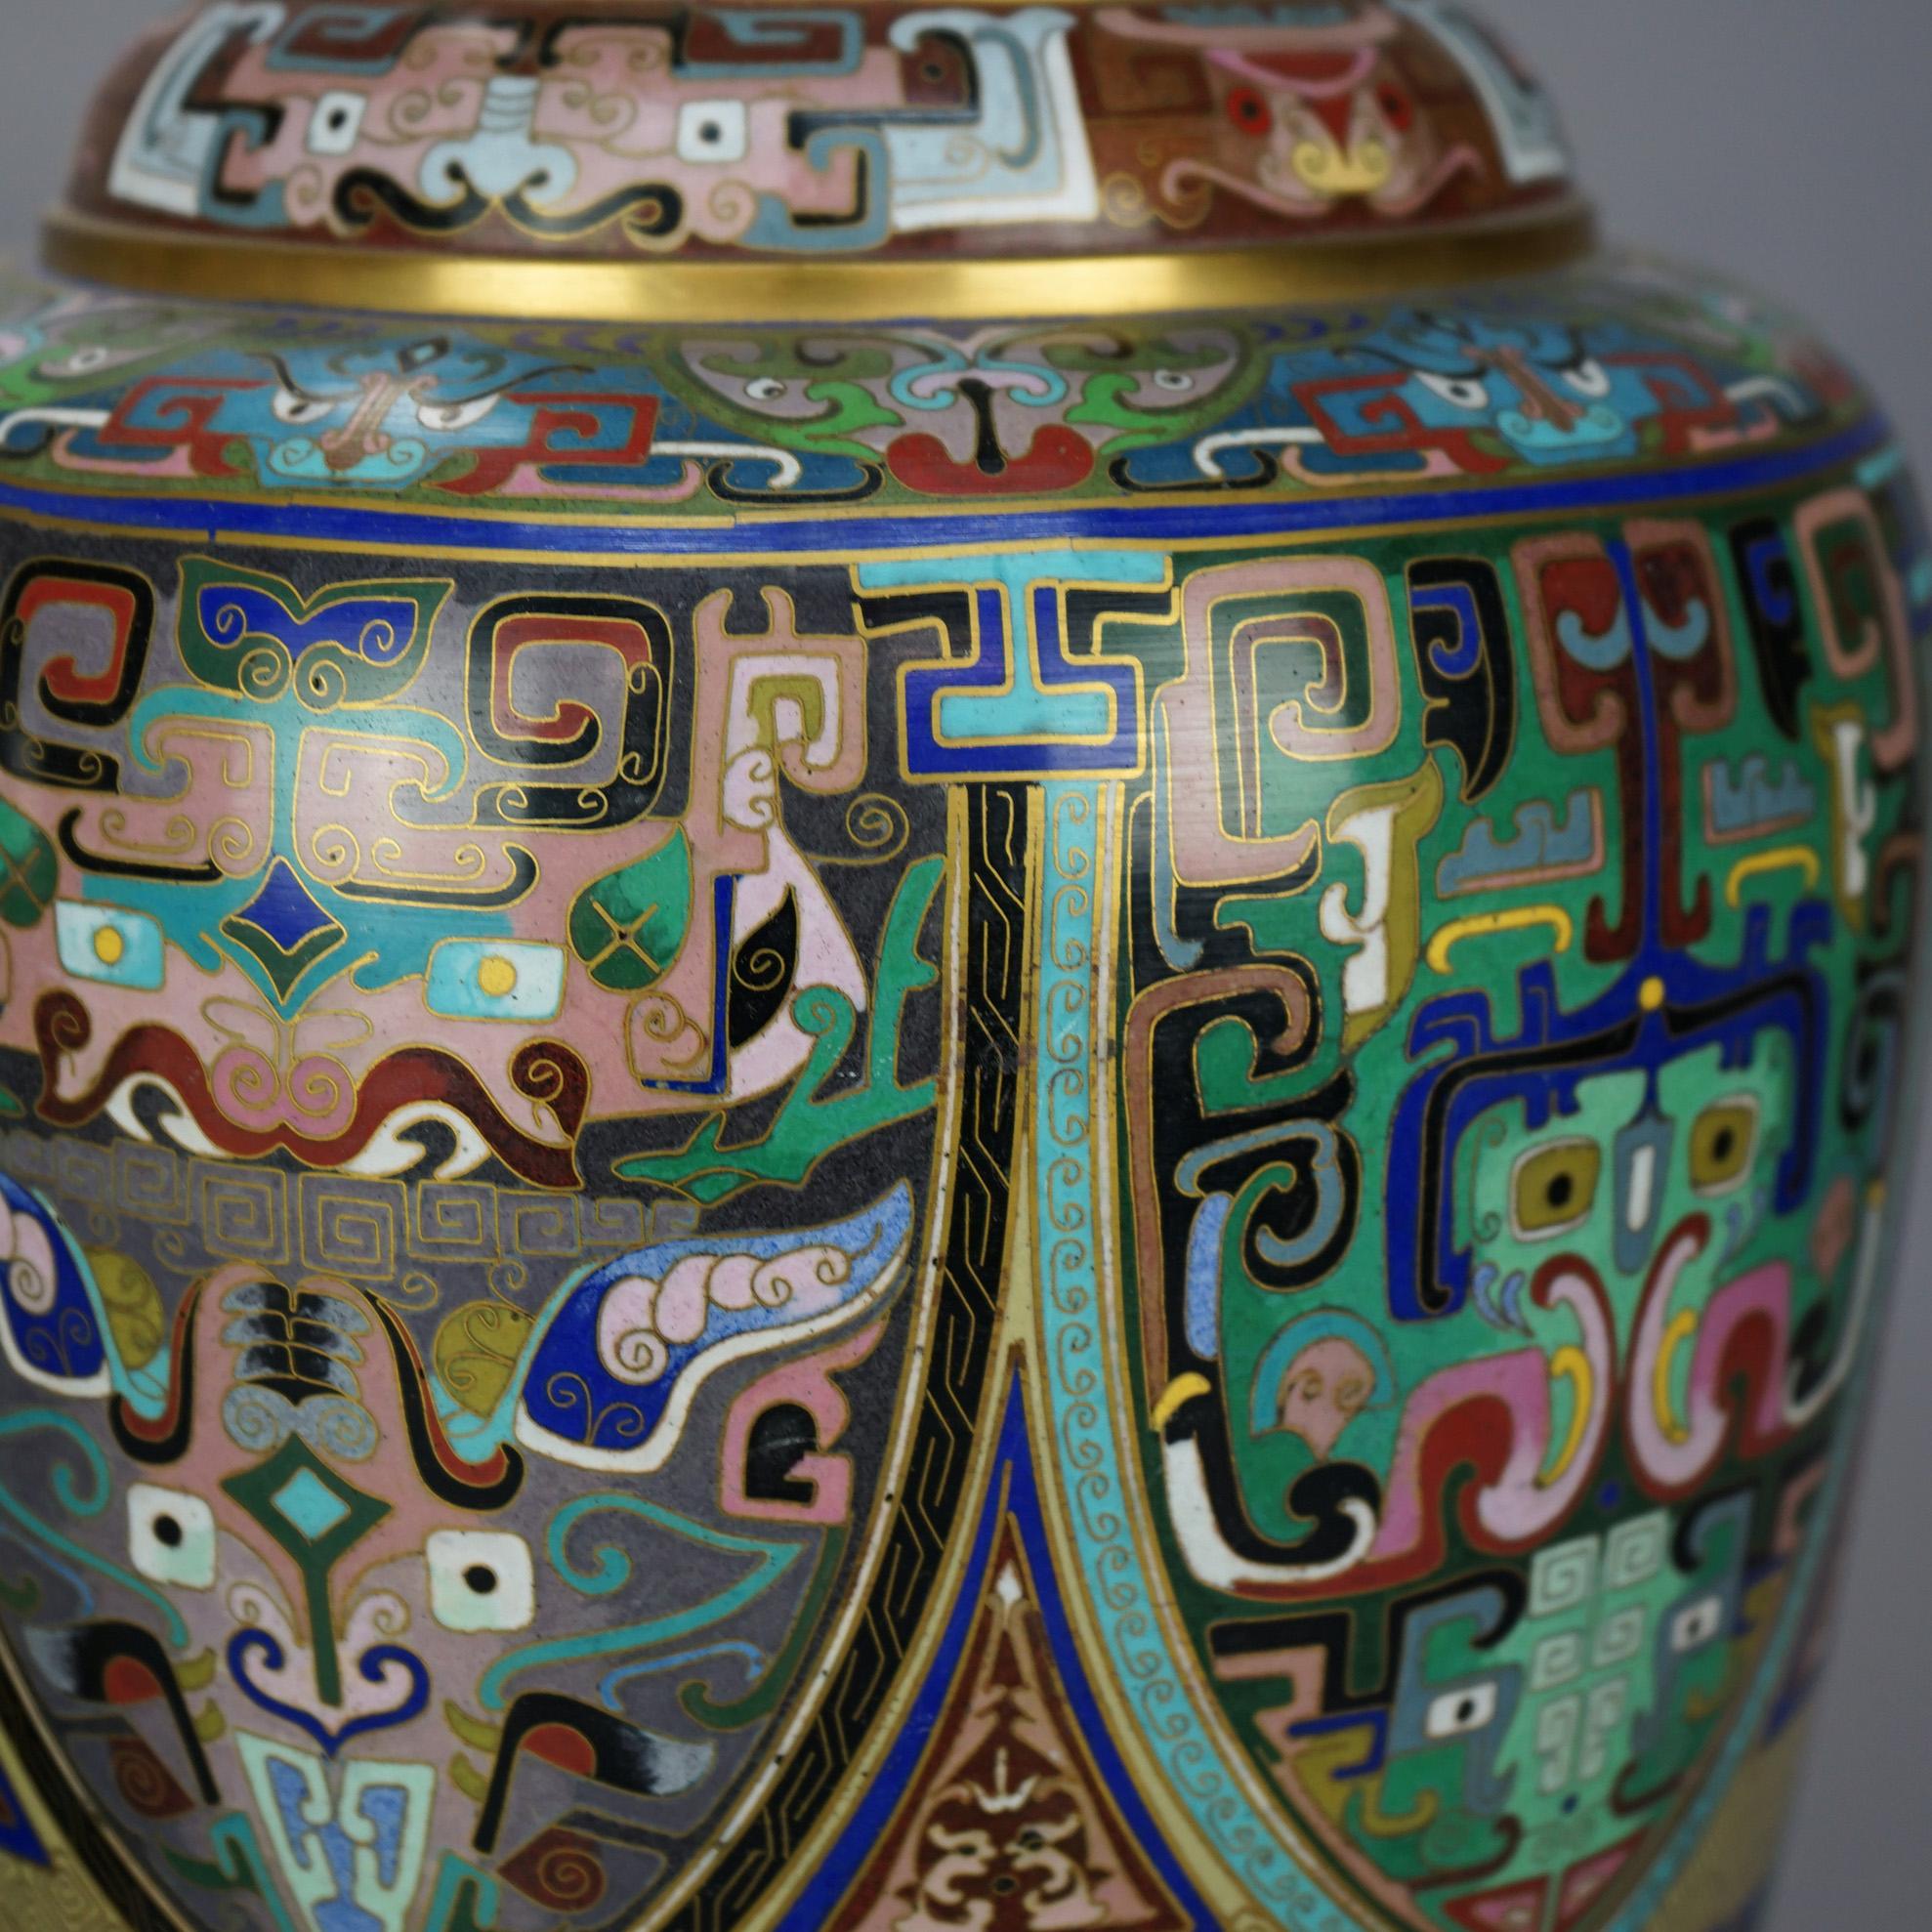 20th Century Monumental Pair of Chinese Cloisonne Vases with Stylized Foliage & Animals 20thc